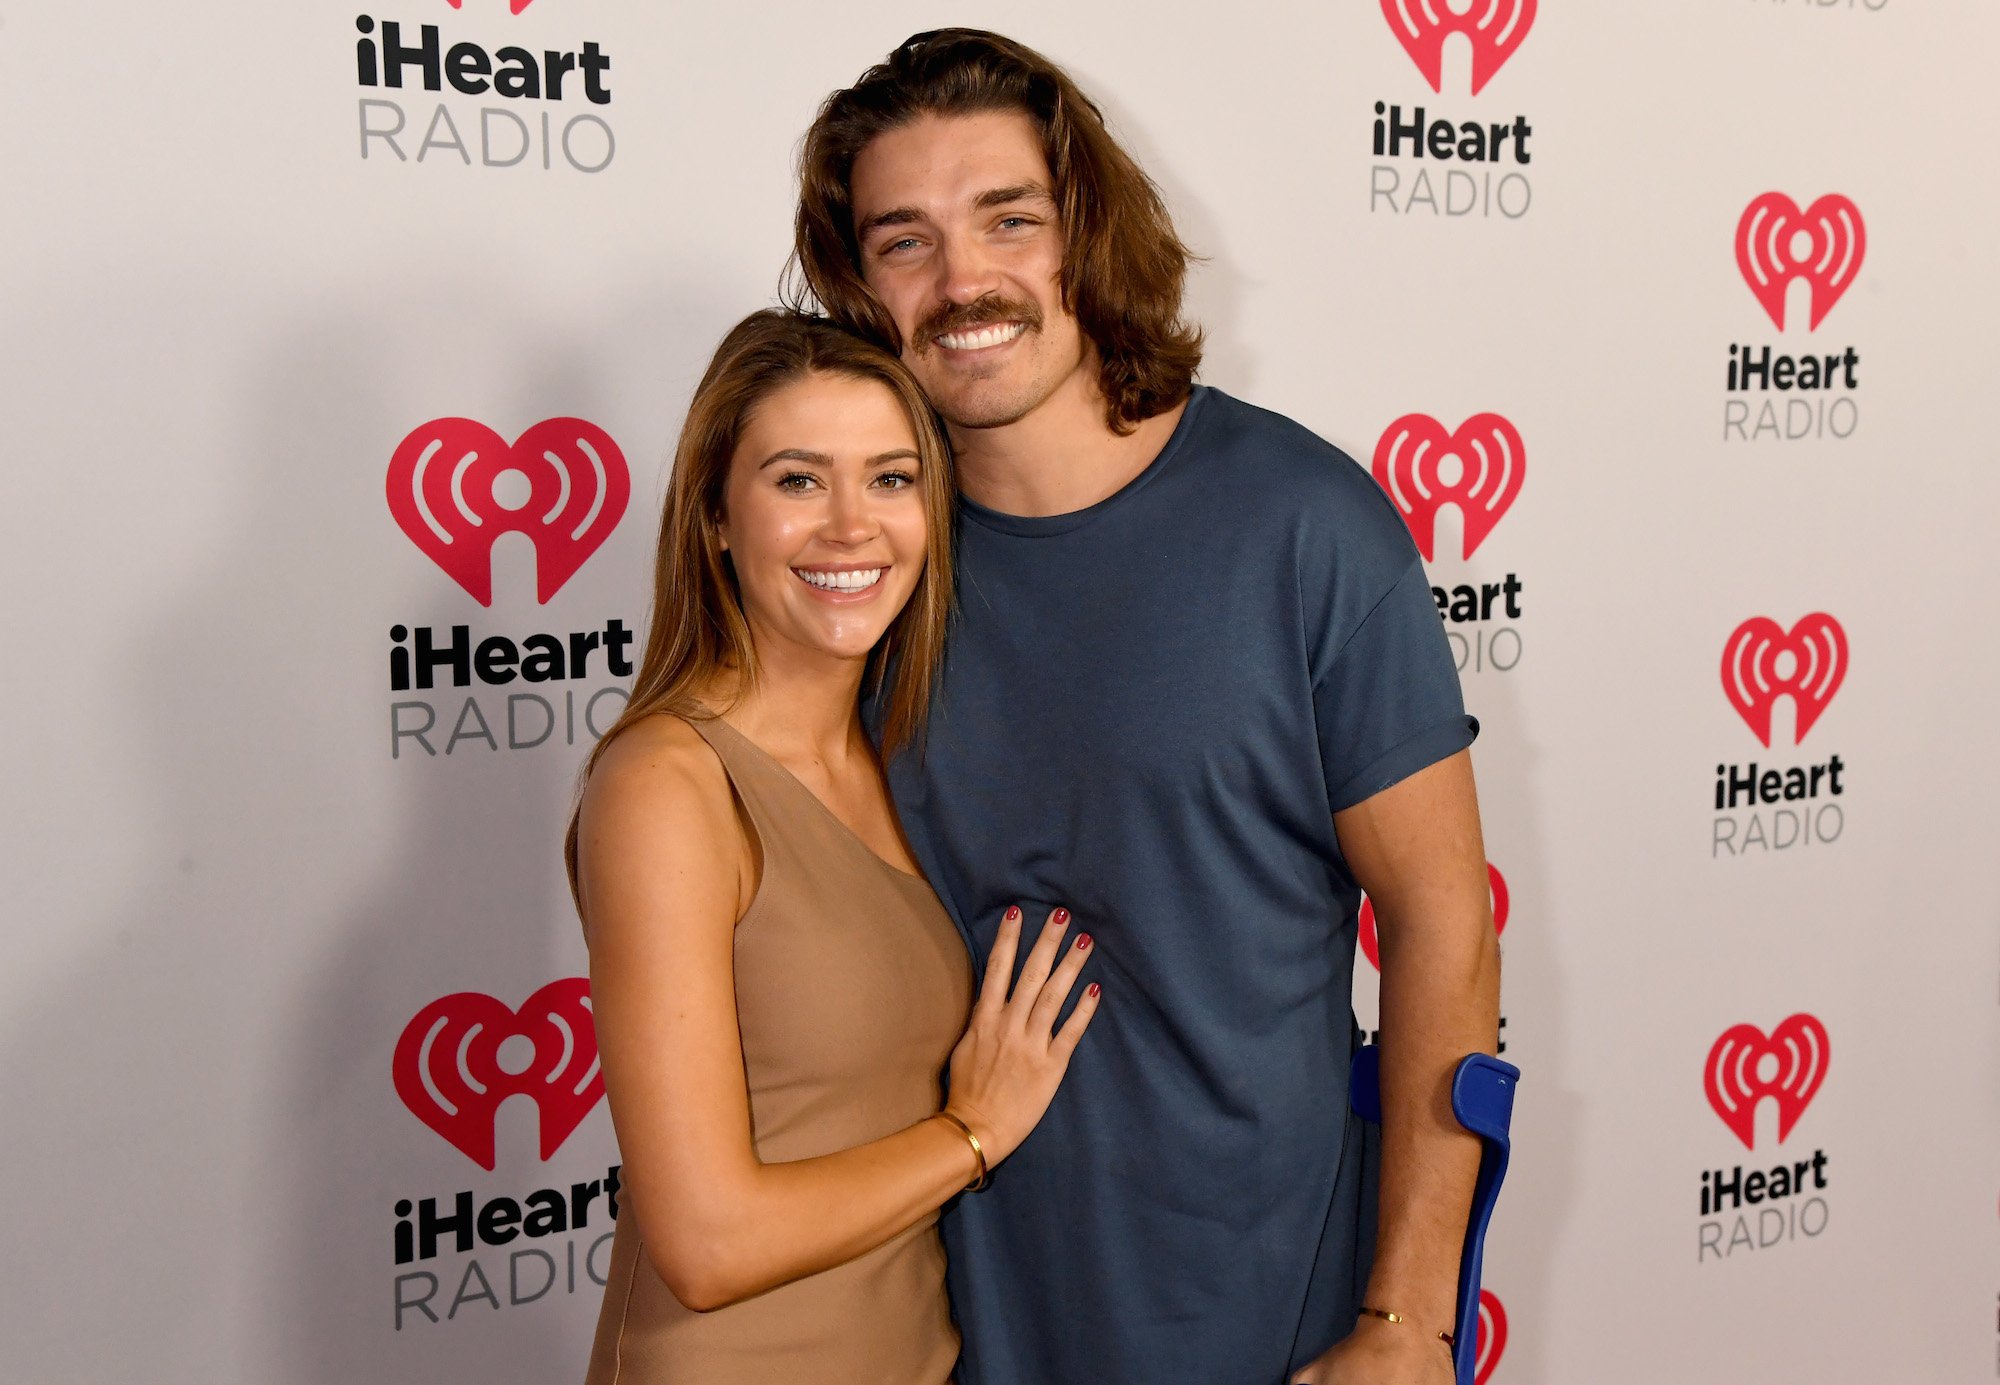 (L-R) Caelynn Miller-Keyes and Dean Unglert attend the 2020 iHeartRadio Podcast Awards